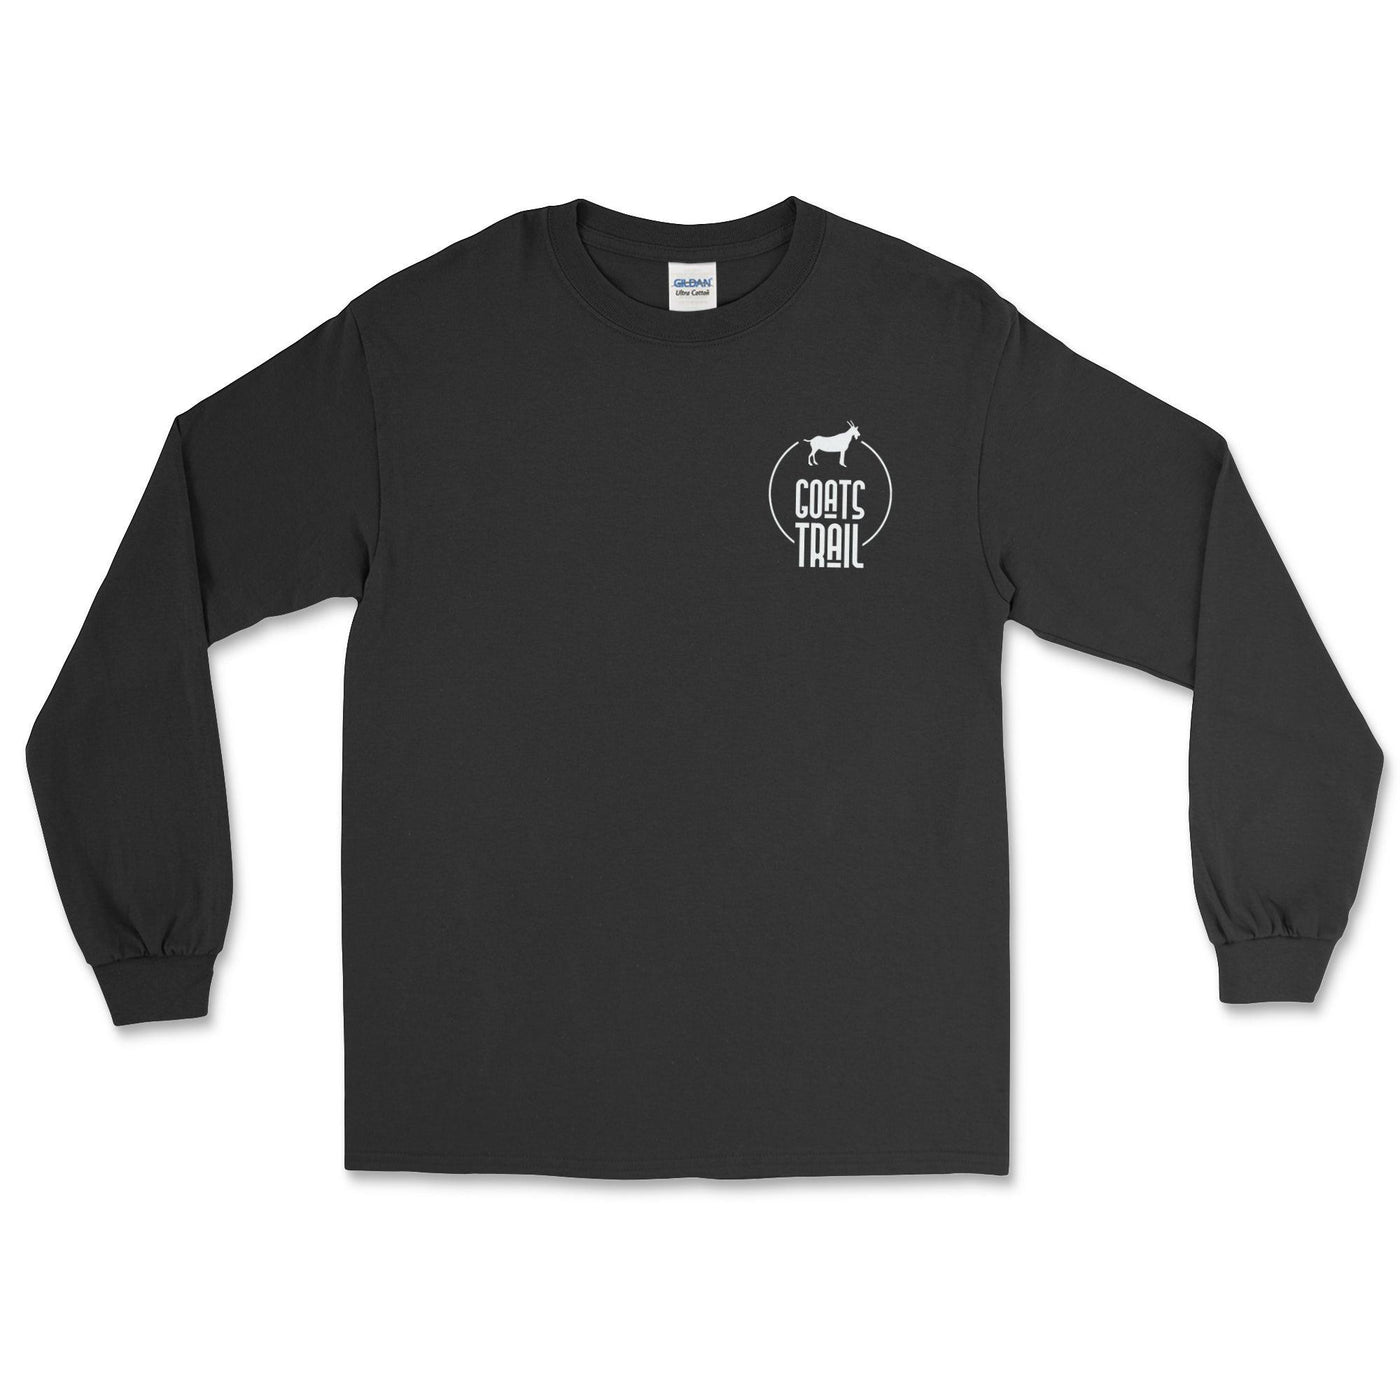 Black Long-Sleeved Ford Bronco Tee - Goats Trail